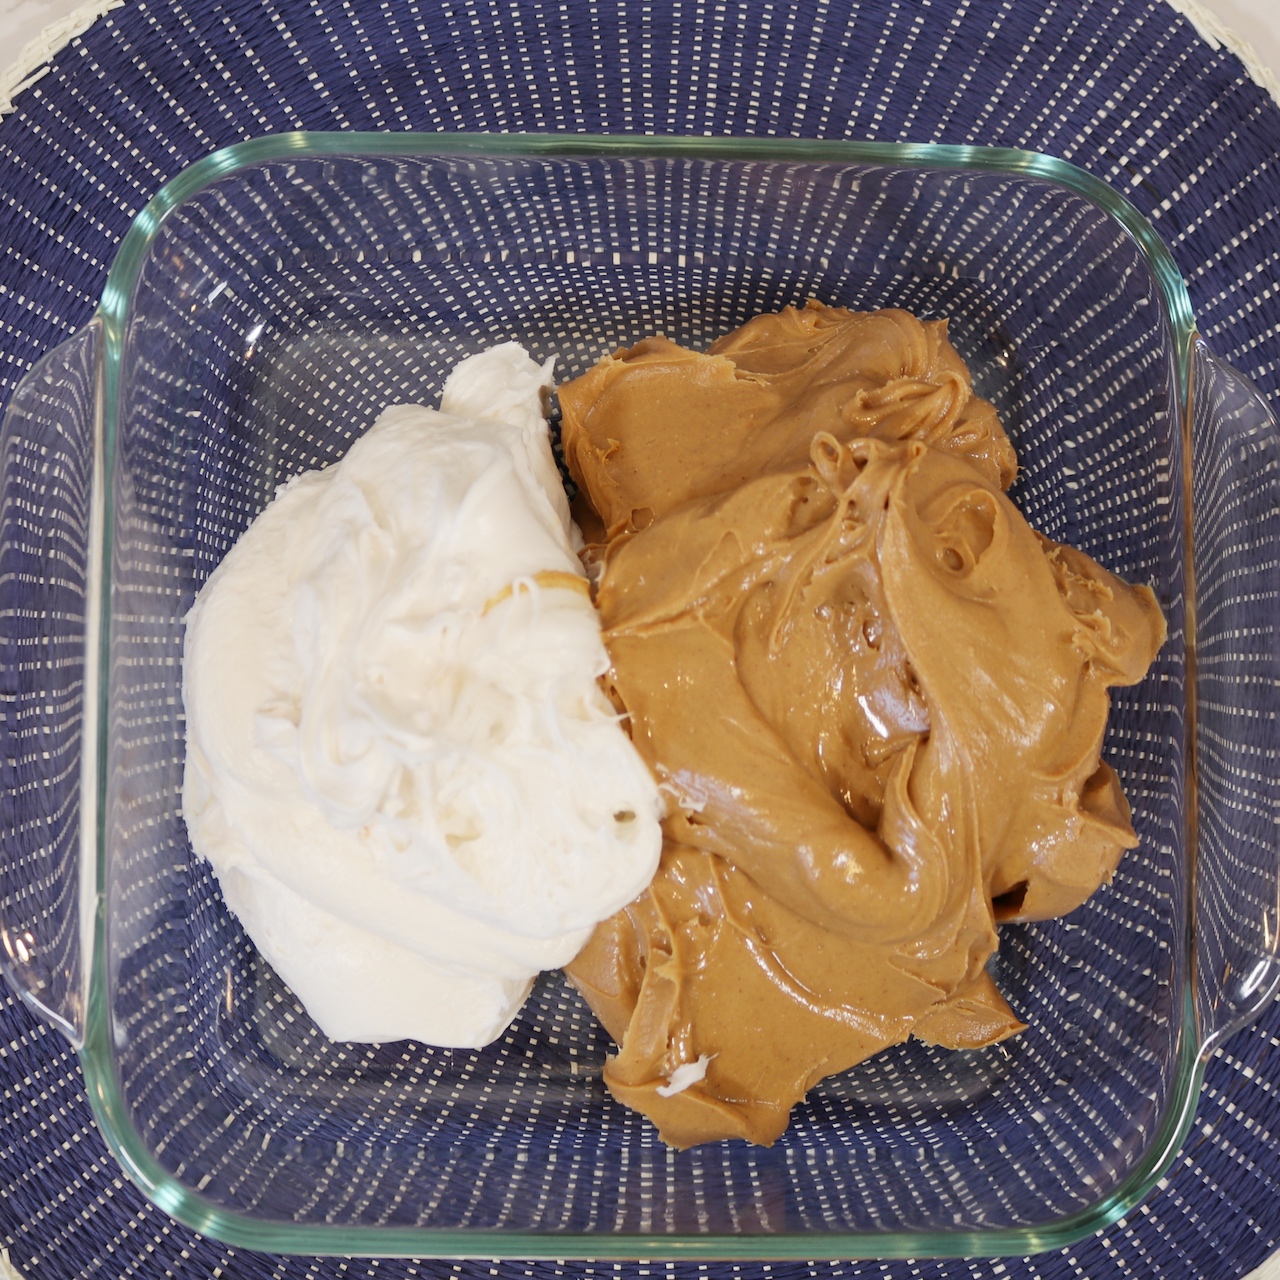 Peanut butter and frosting in glass dish